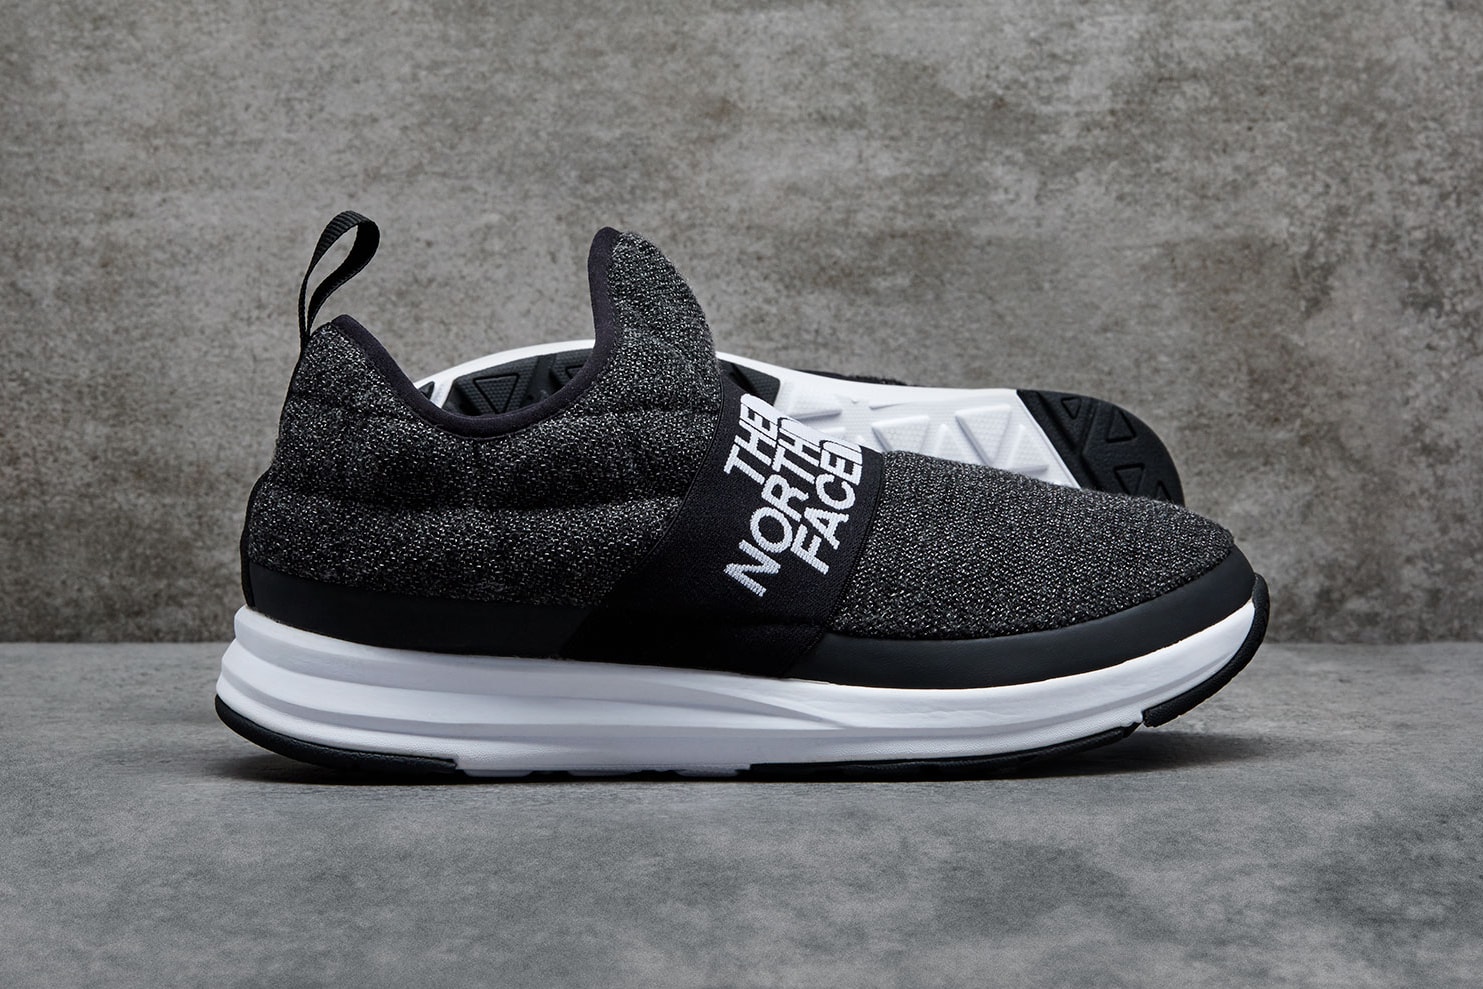 The North Face Fall Winter 2017 NSE Japan Collection Traction Chukka Lite II Moc Shiny Black Mixed Grey Sneakers Shoes Footwear Boots